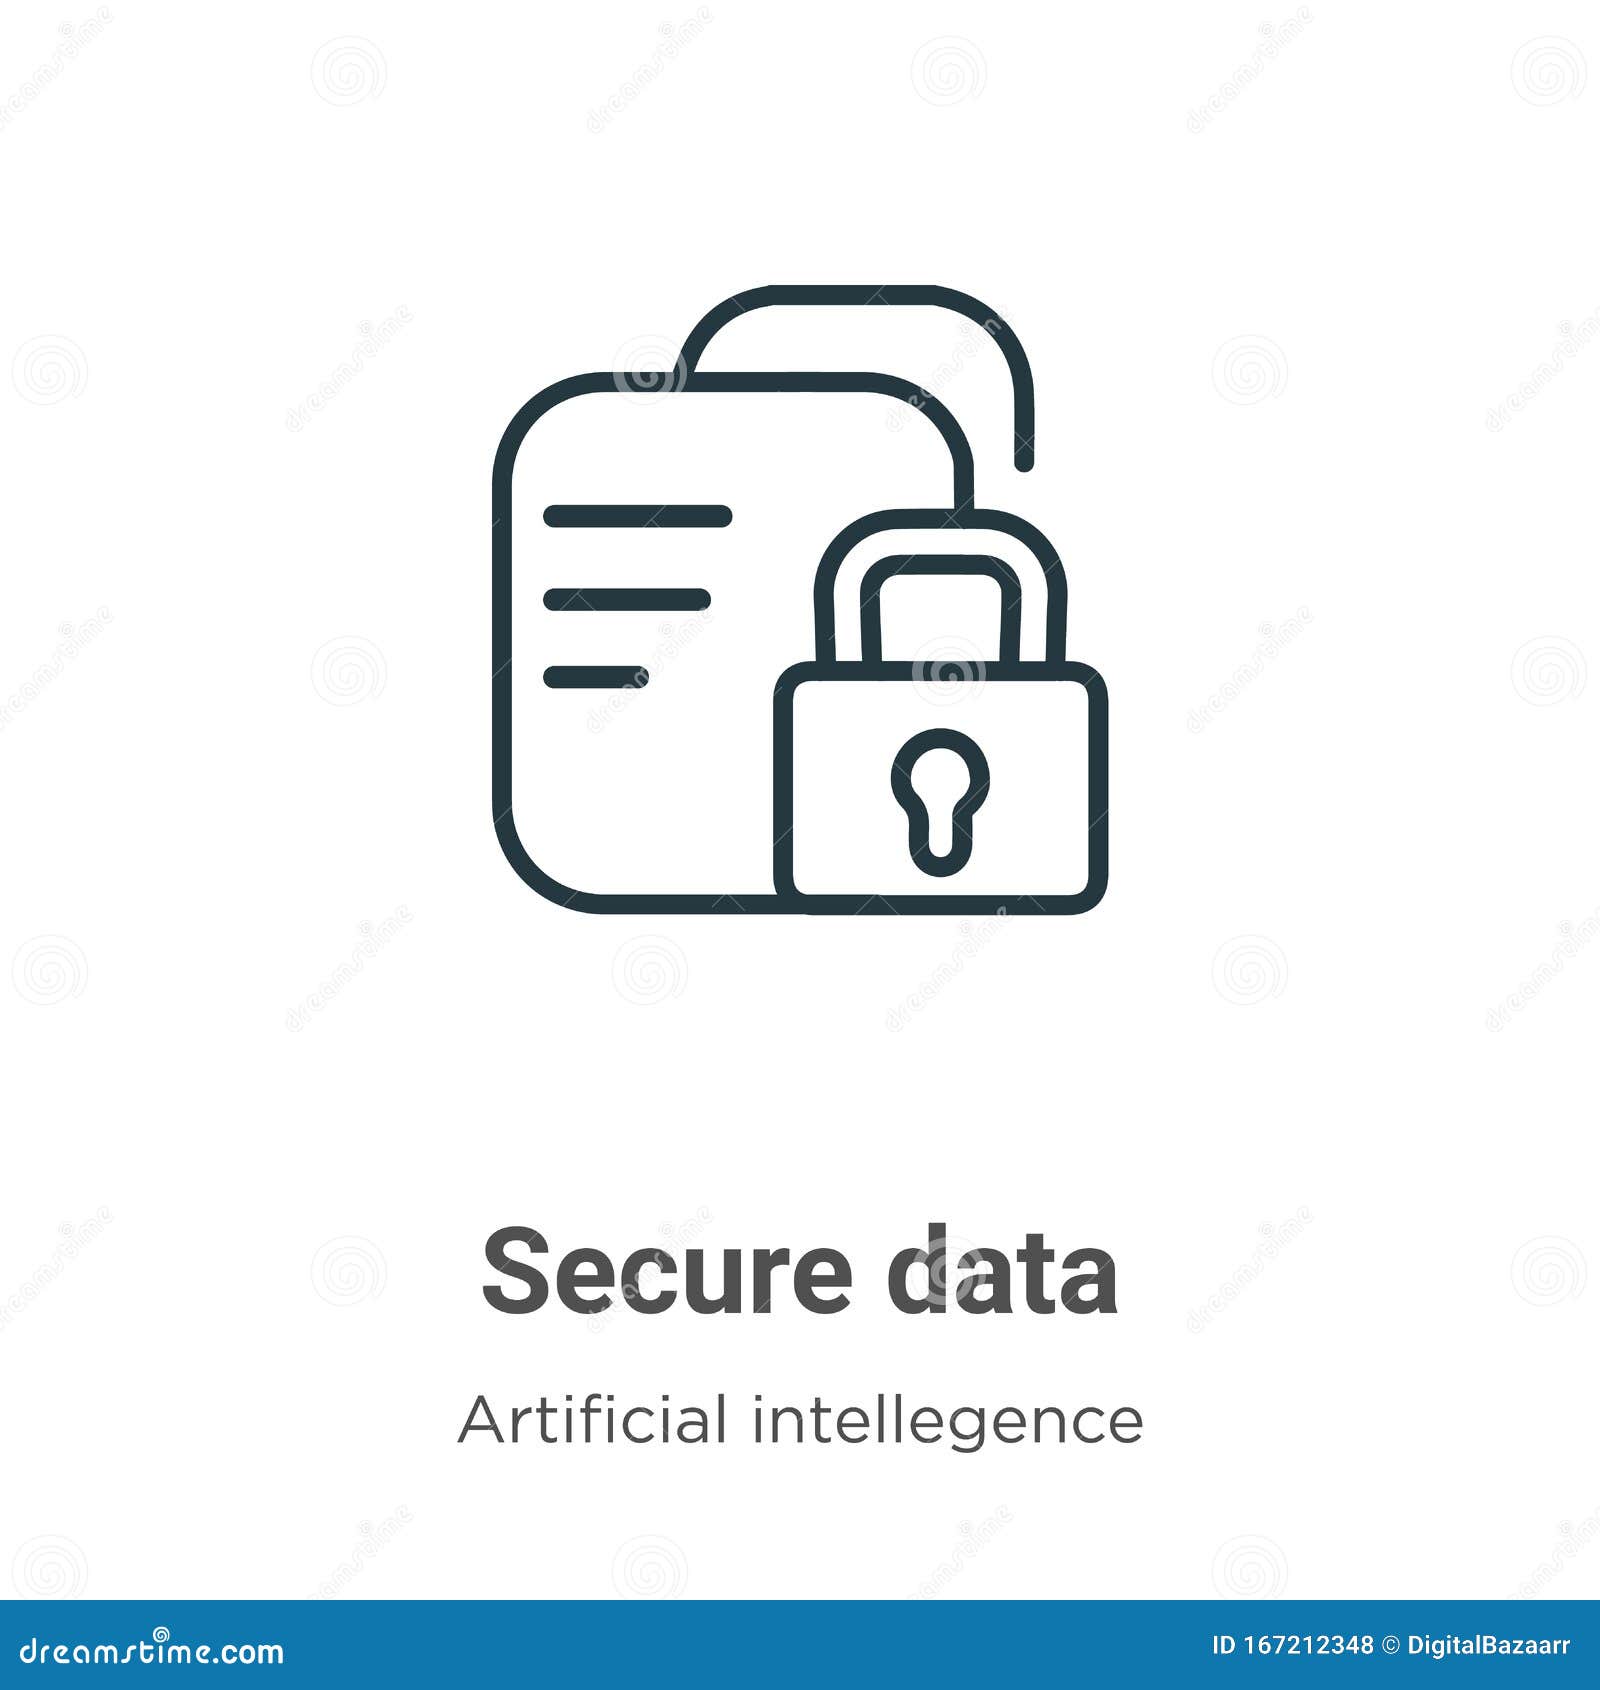 secure data outline  icon. thin line black secure data icon, flat  simple   from editable